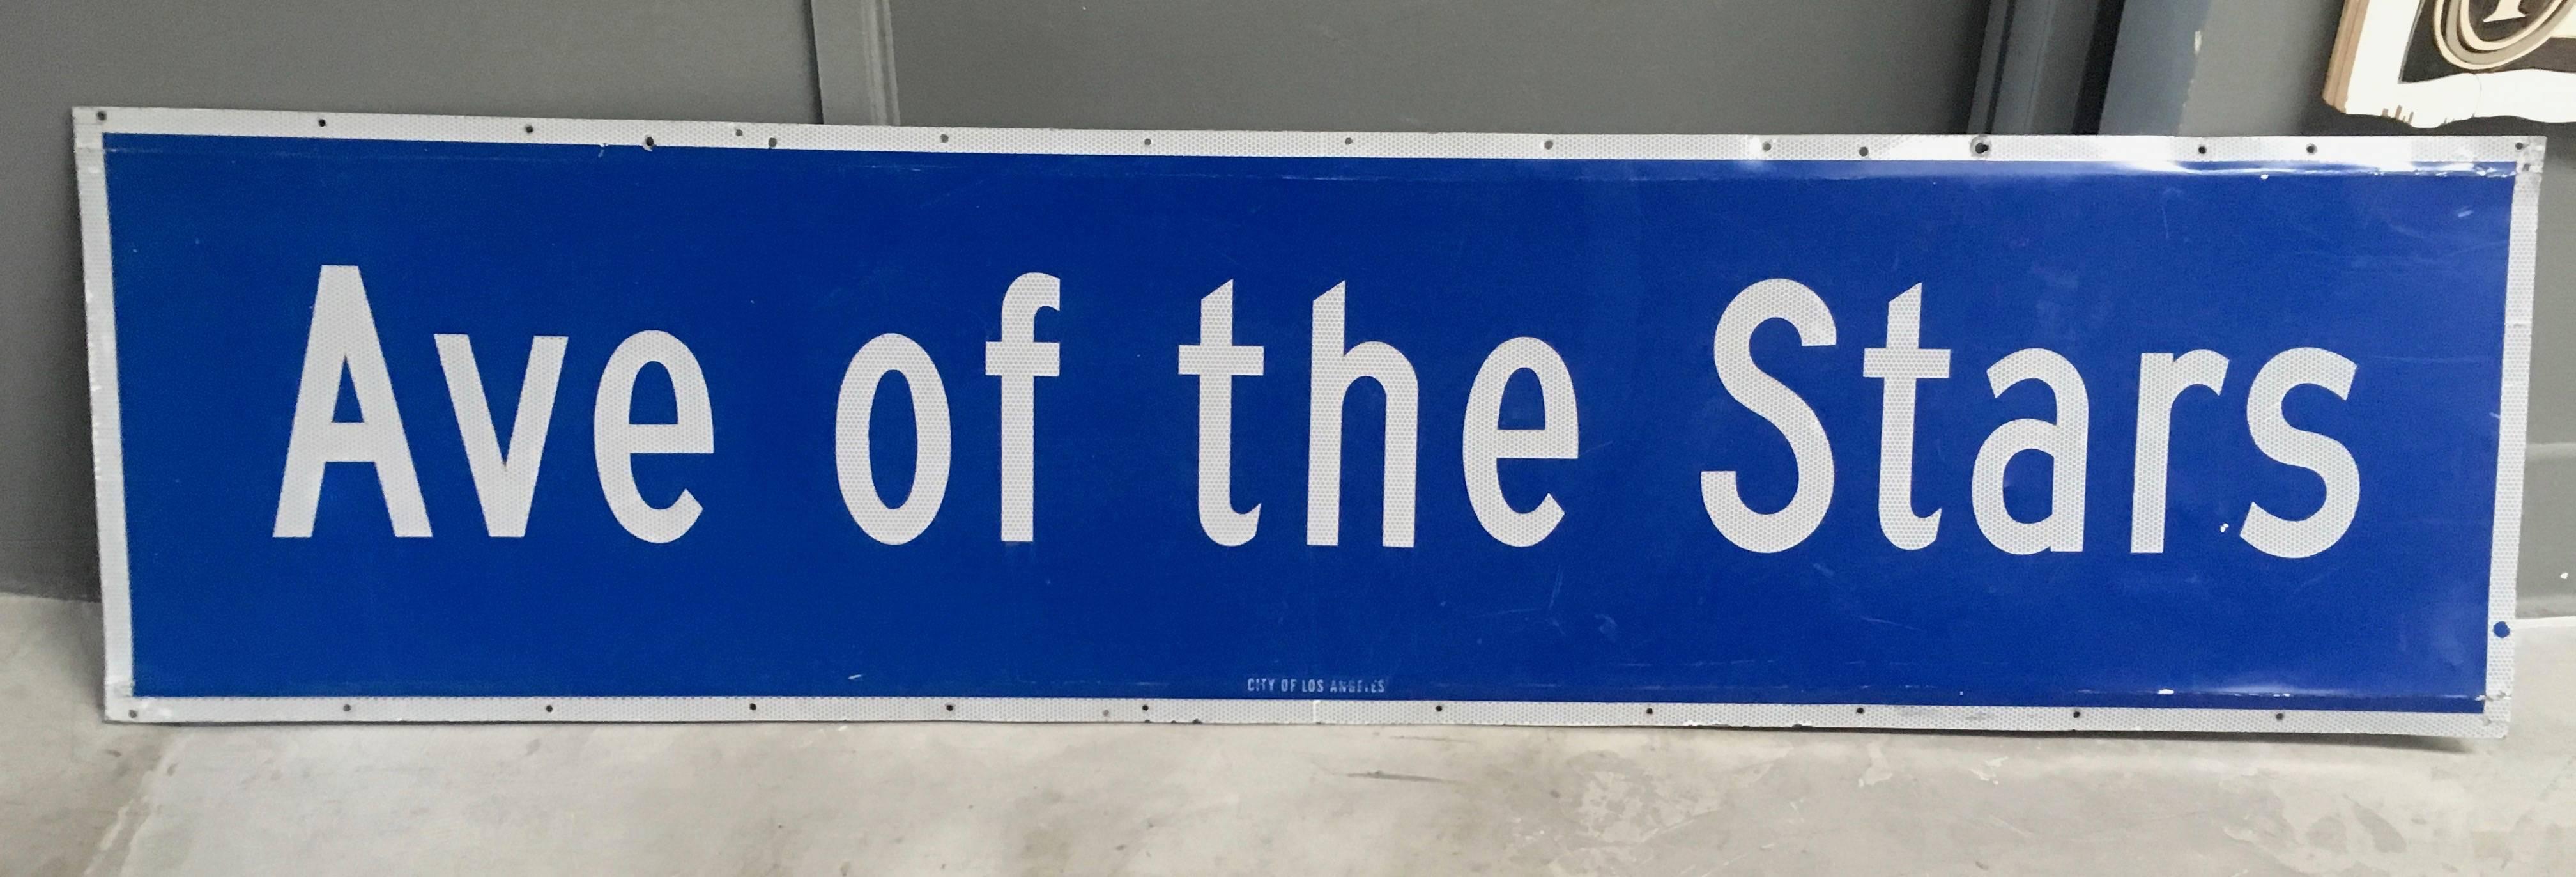 Very cool blue and white metal street sign from Los Angeles depicting 